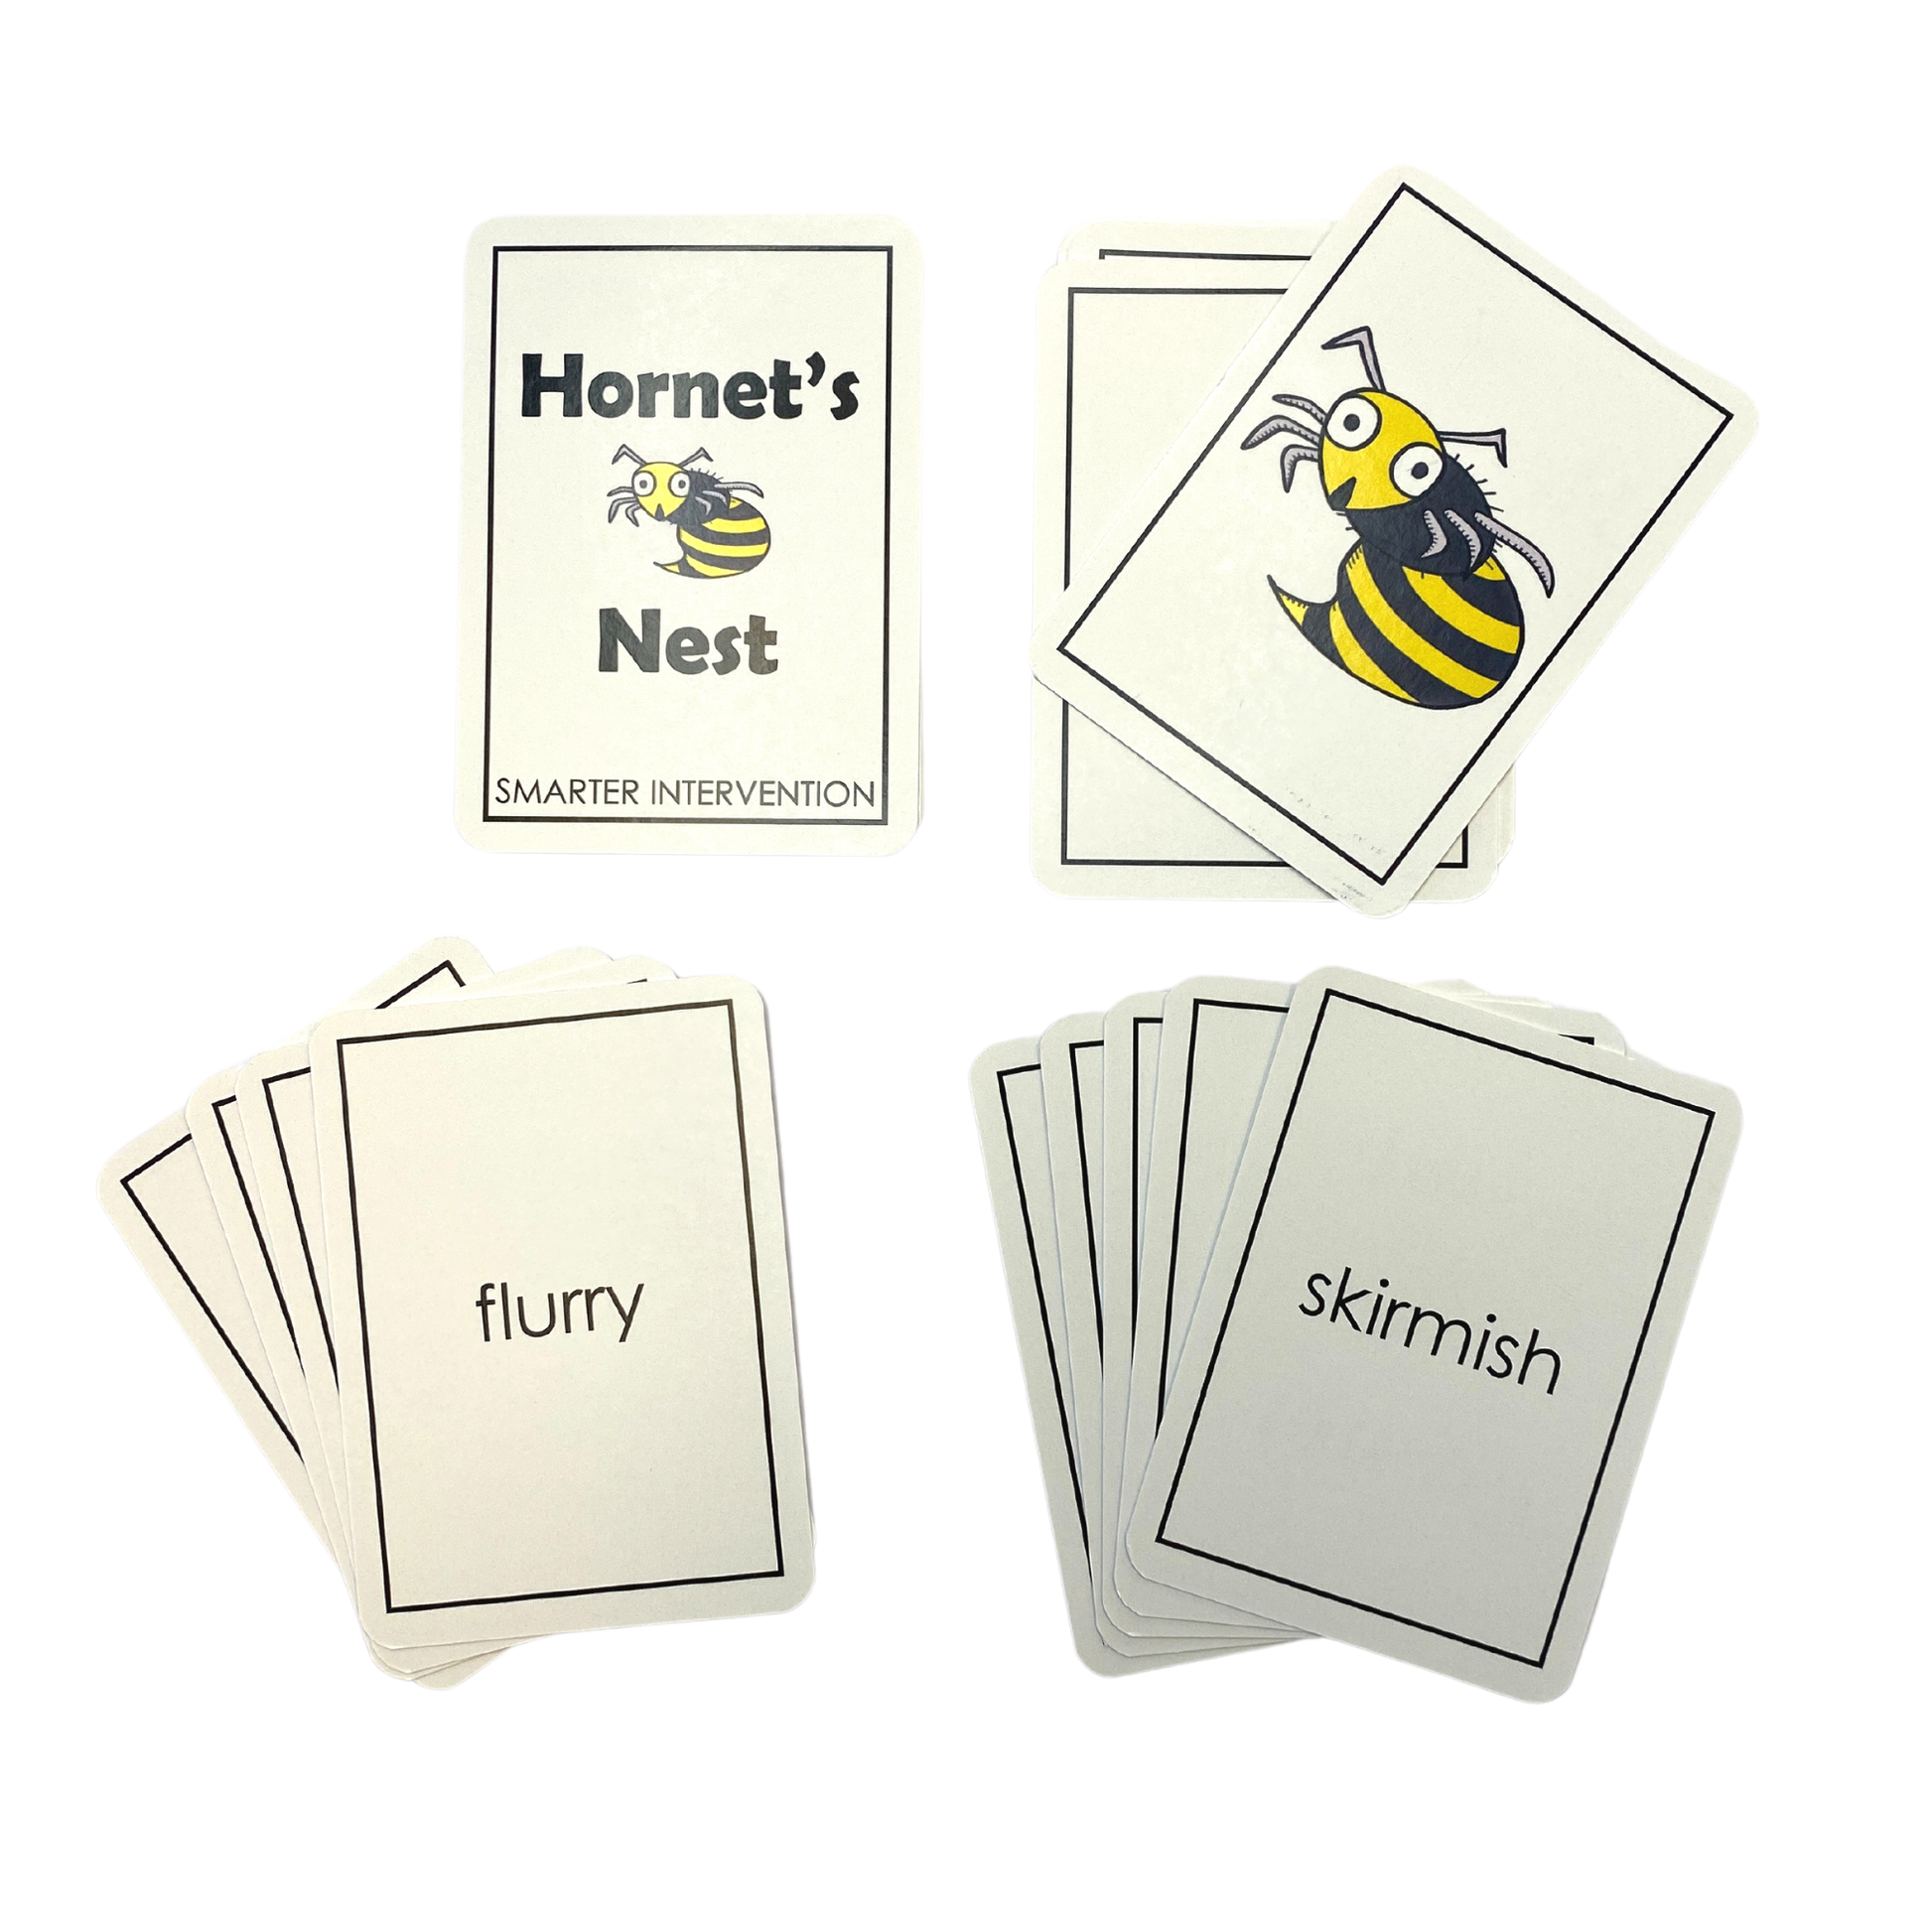 Use the Hornet Division game cards as a syllable division review drill in small group interventions or as a literacy center activity. This game helps students strengthen their reading skills, build their vocabulary, and improve their comprehension in a fun and interactive way. It is designed to reinforce key concepts in a way that is engaging and memorable.